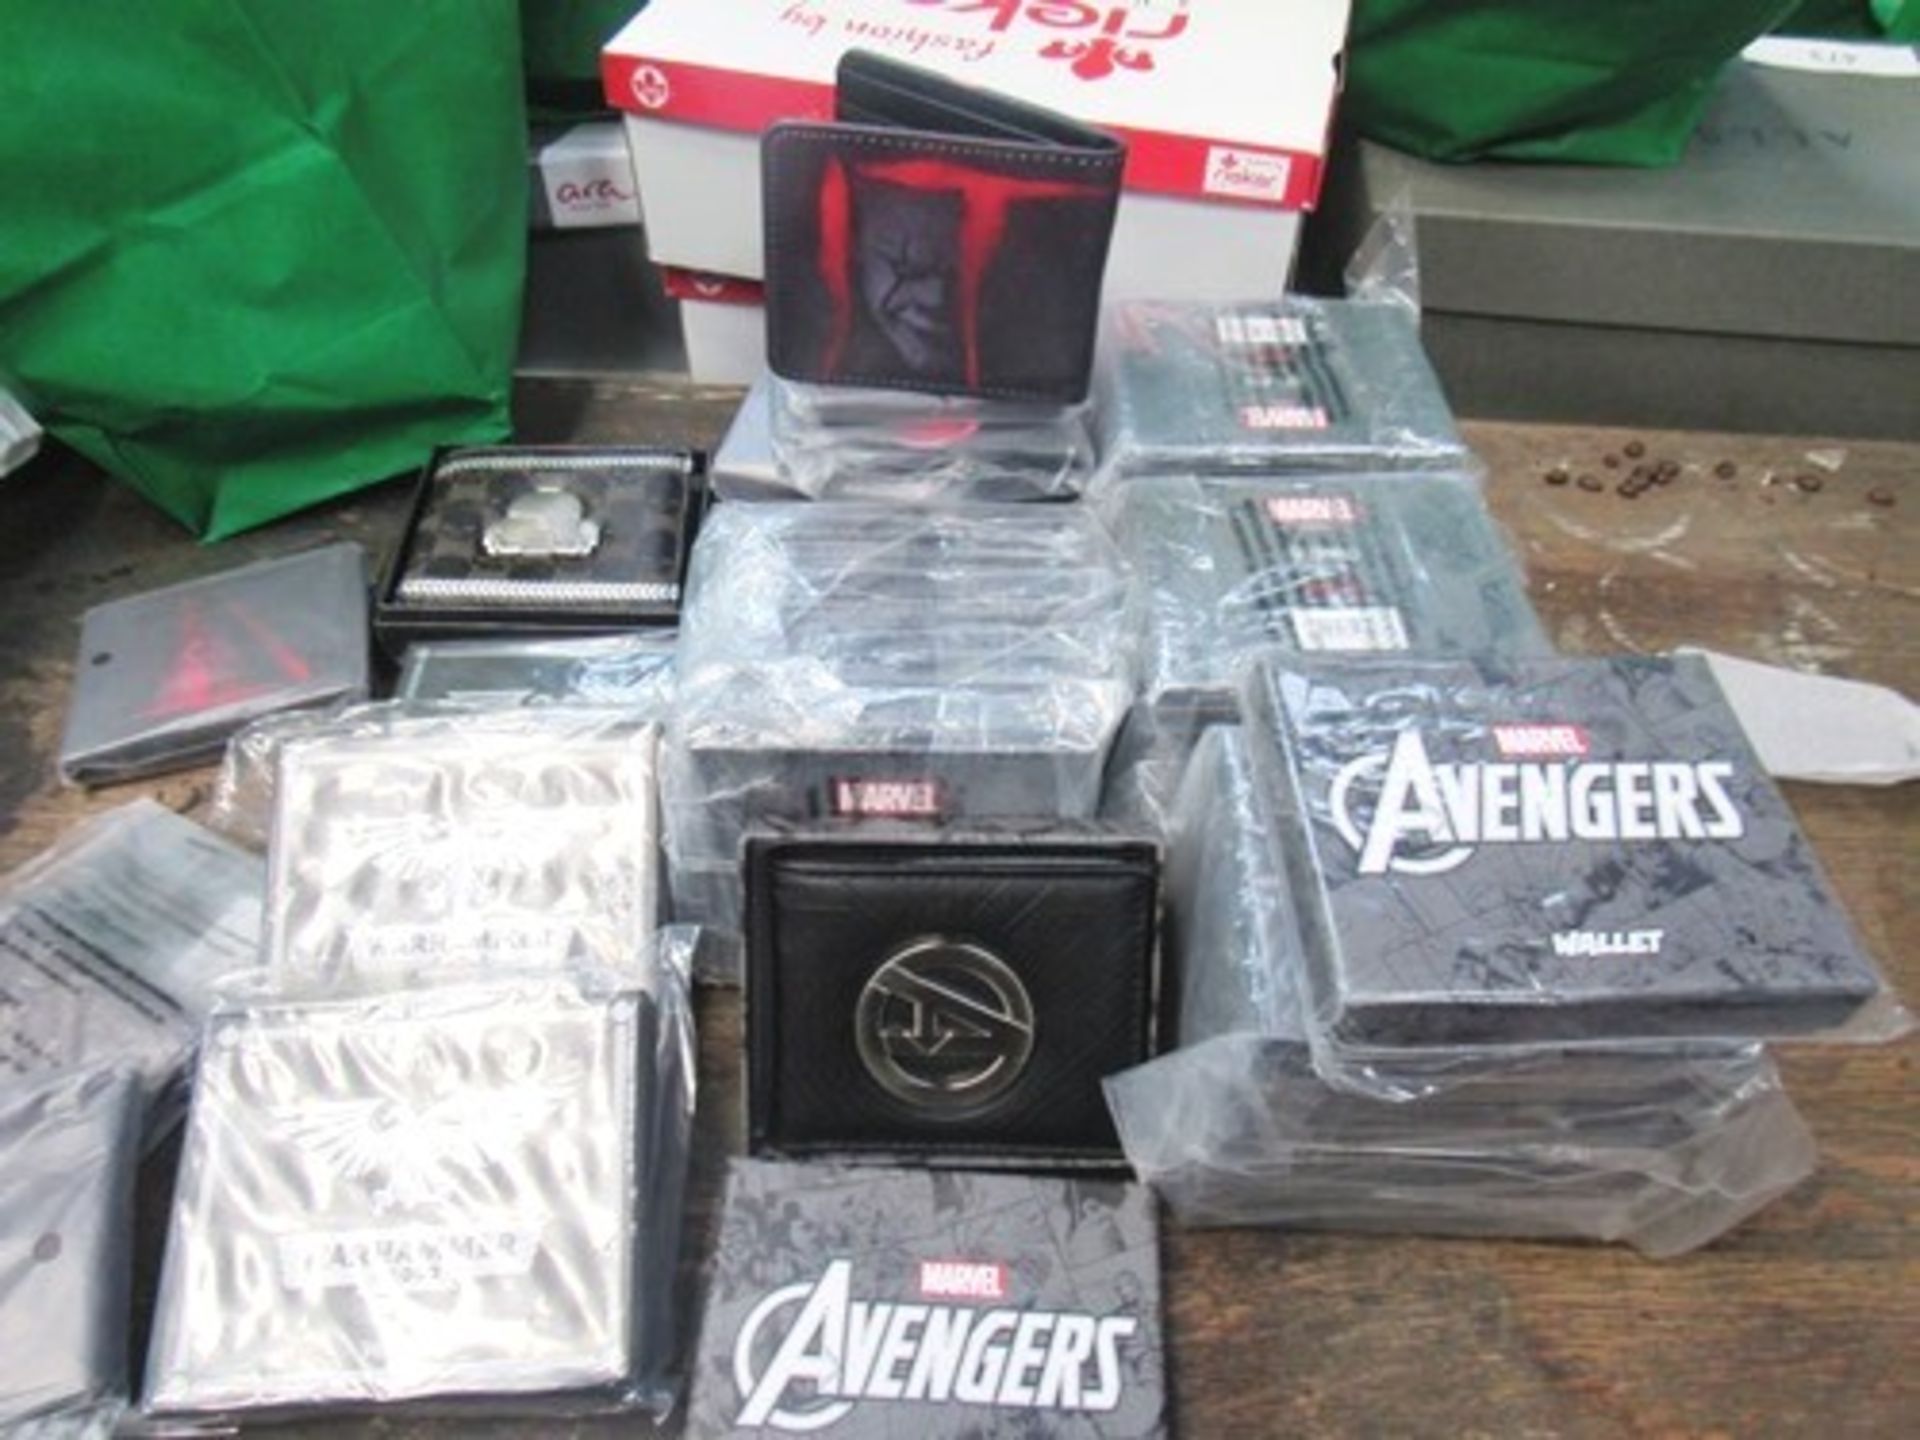 Approximately 35 x wallets including 16 x Avengers, 3 x Warhammer, 10 x It etc. - New (FC7)